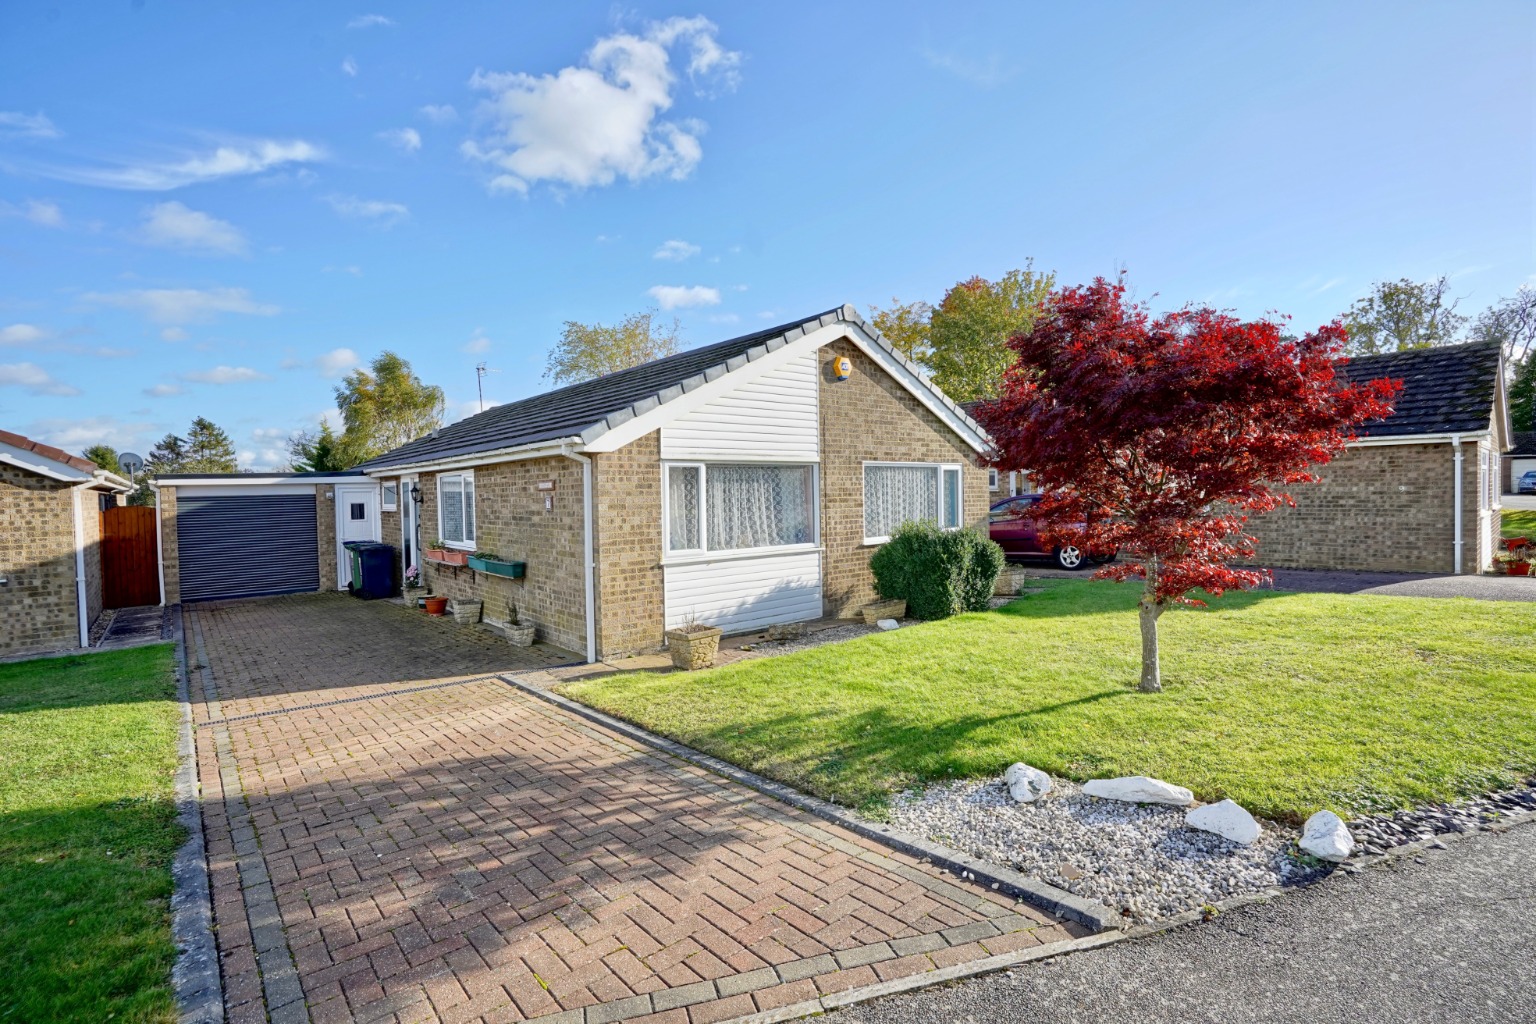 Set in a quiet cul-de-sac is this detached bungalow in need of some modernisation within walking distance to Grafham Water with three good size bedrooms, single garage and driveway, good size rear garden and no onward chain